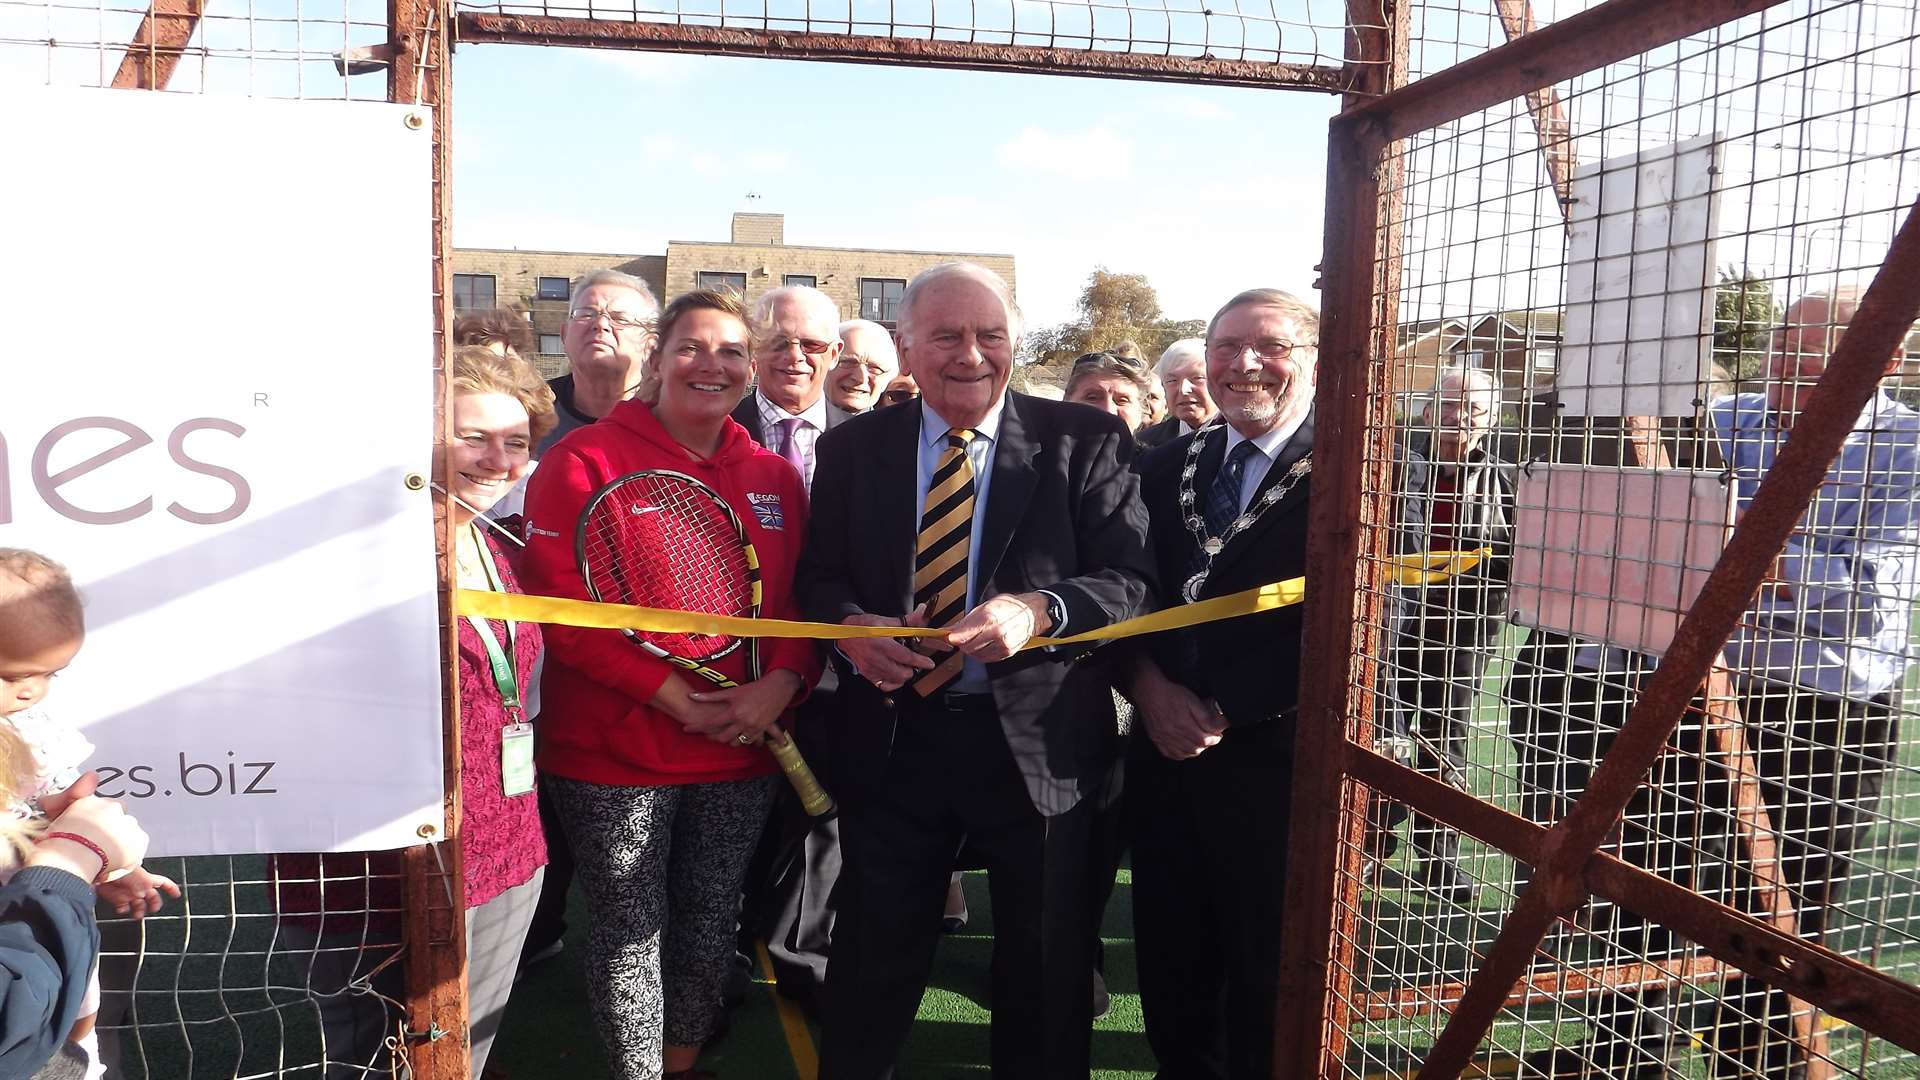 The grand opening of the refurbished tennis courts at Birchington Bowls Club